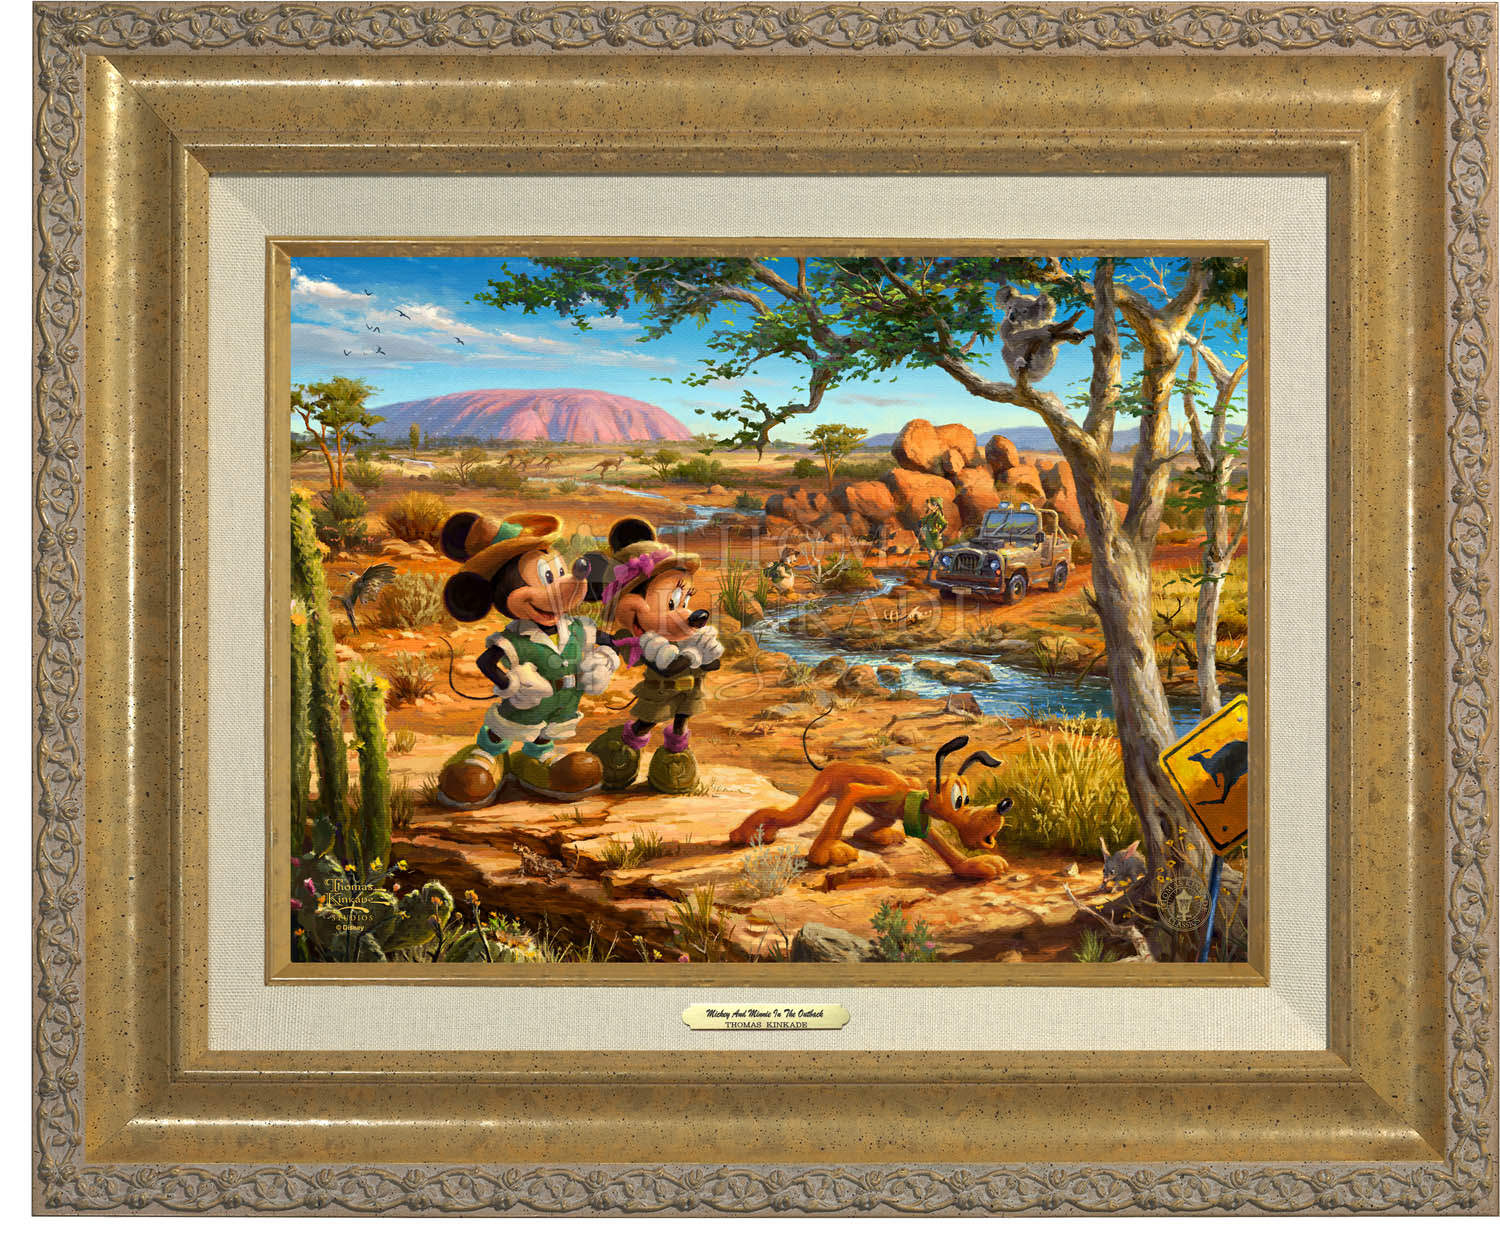 Mickey, Minnie, Pluto Donald, and Goofy explore the land down under - Australia - Antique Gold Frame